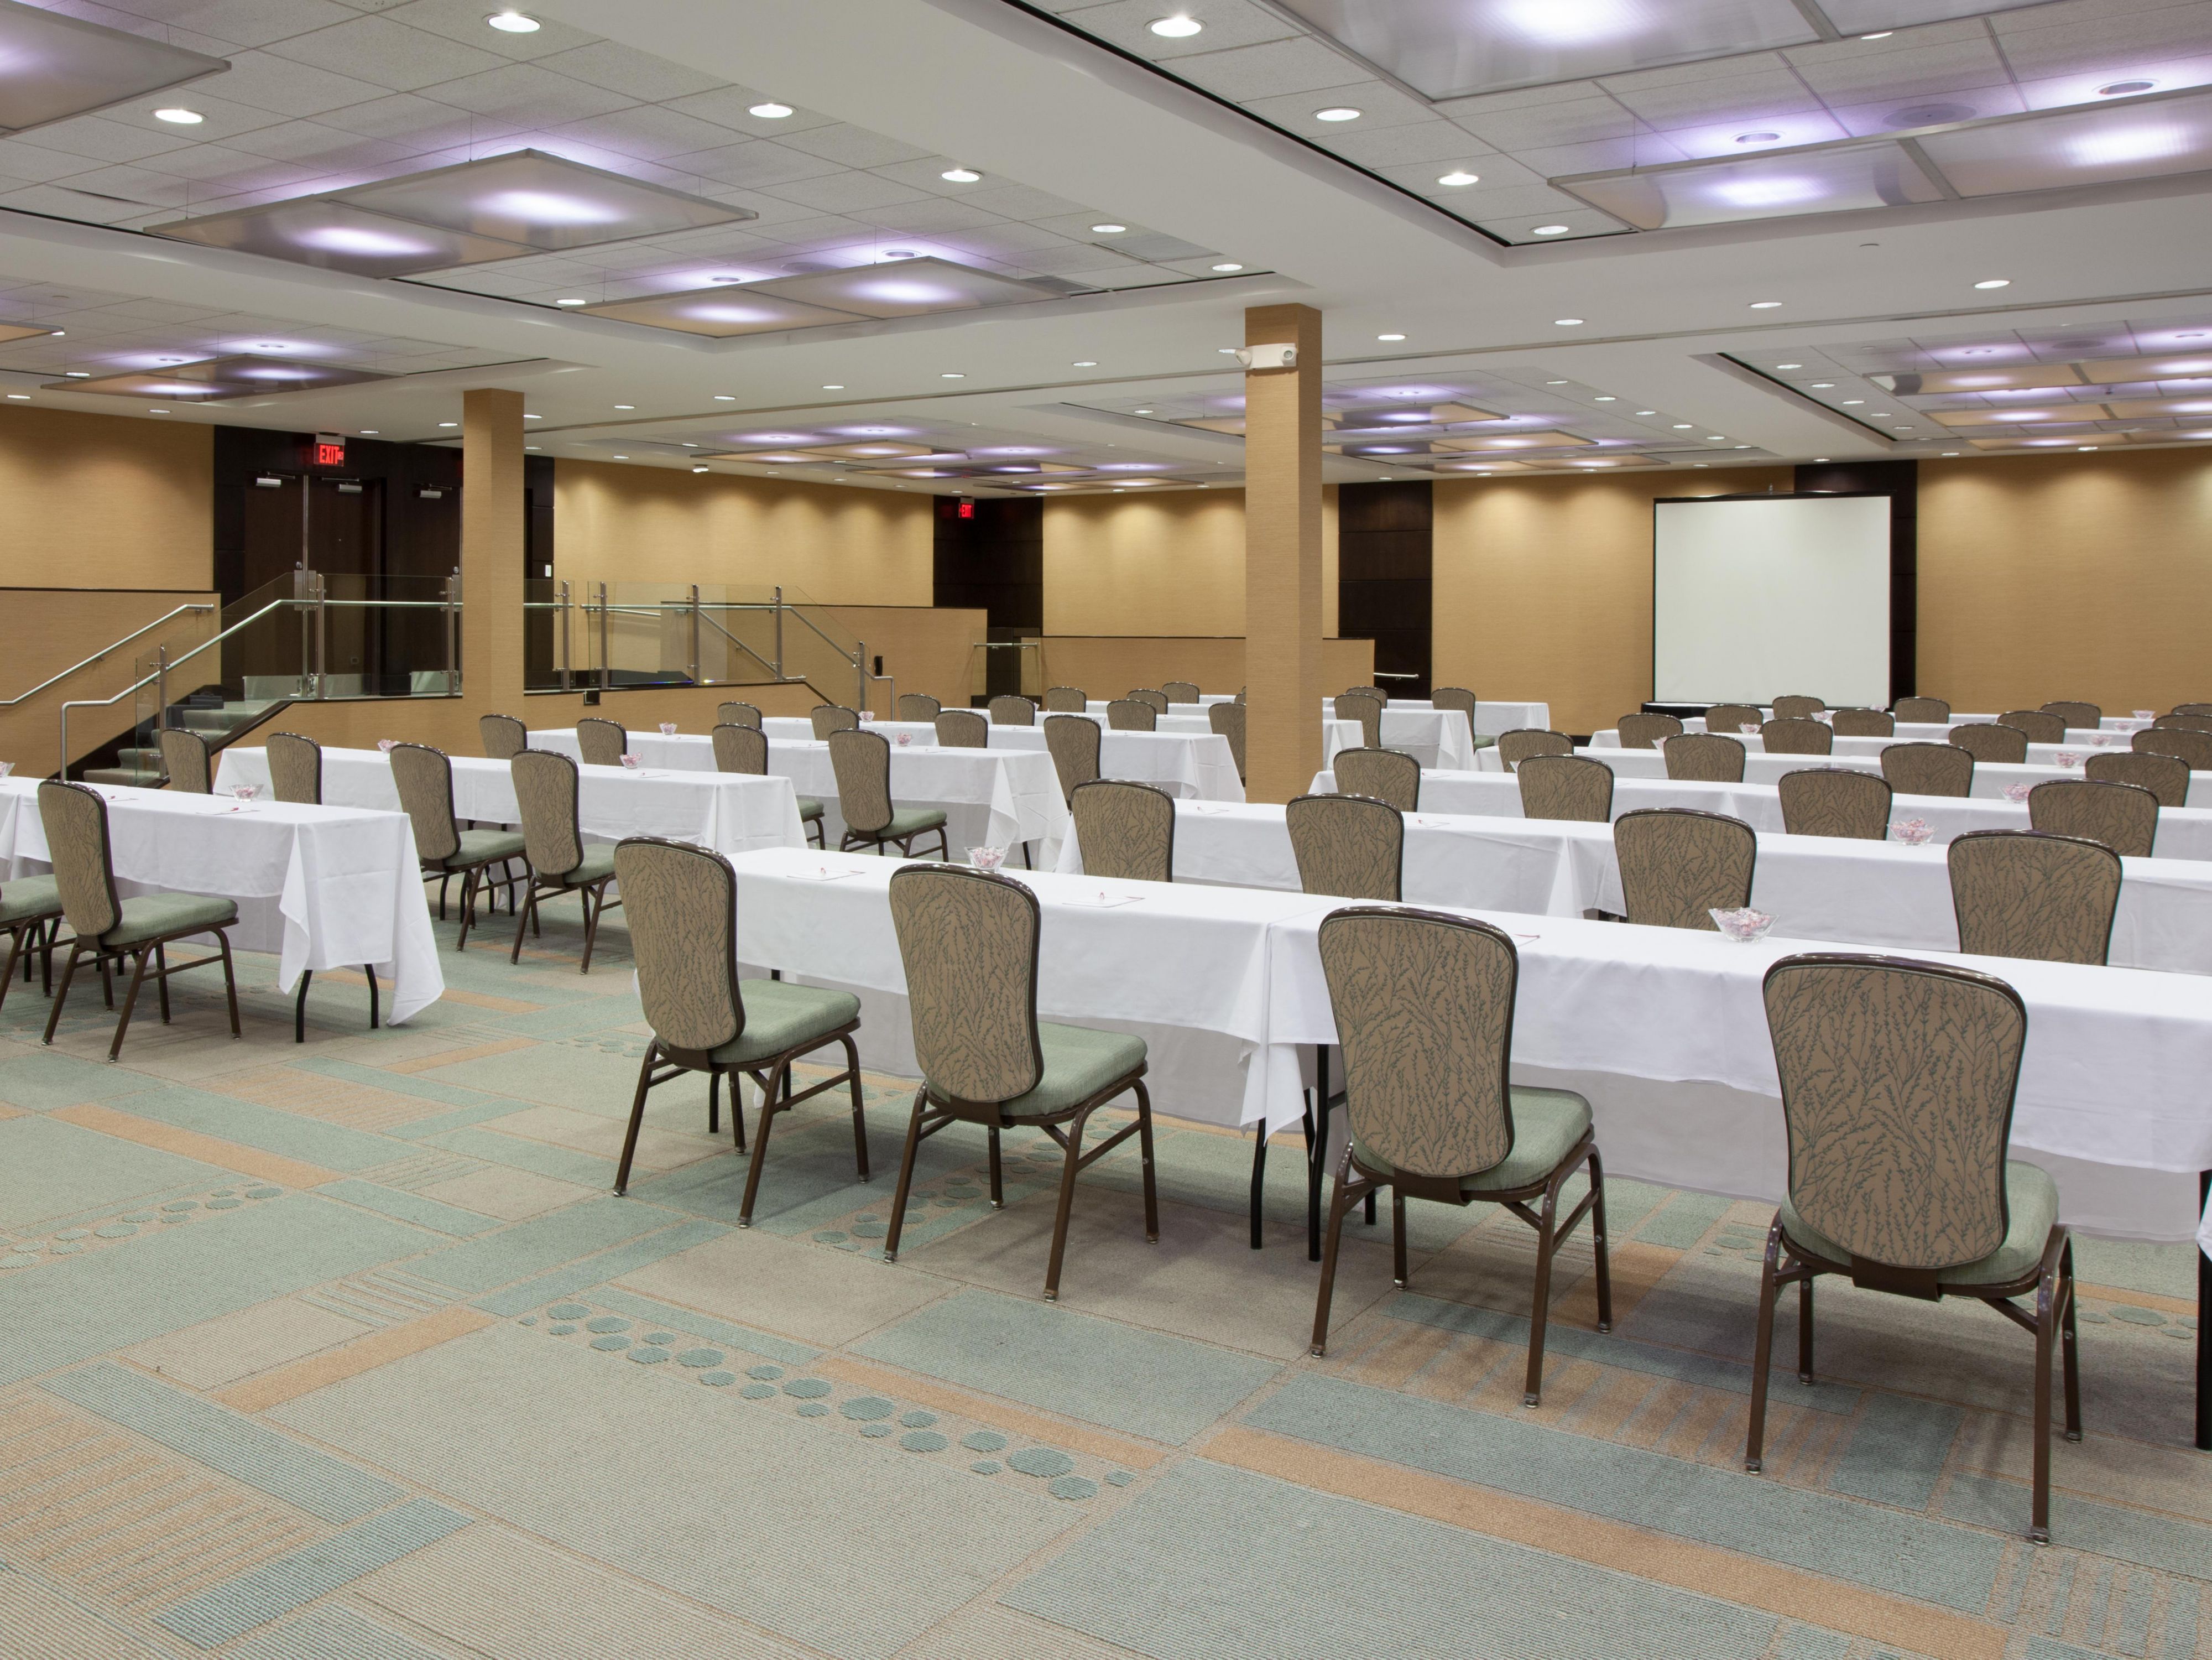 Planning a meeting or event?